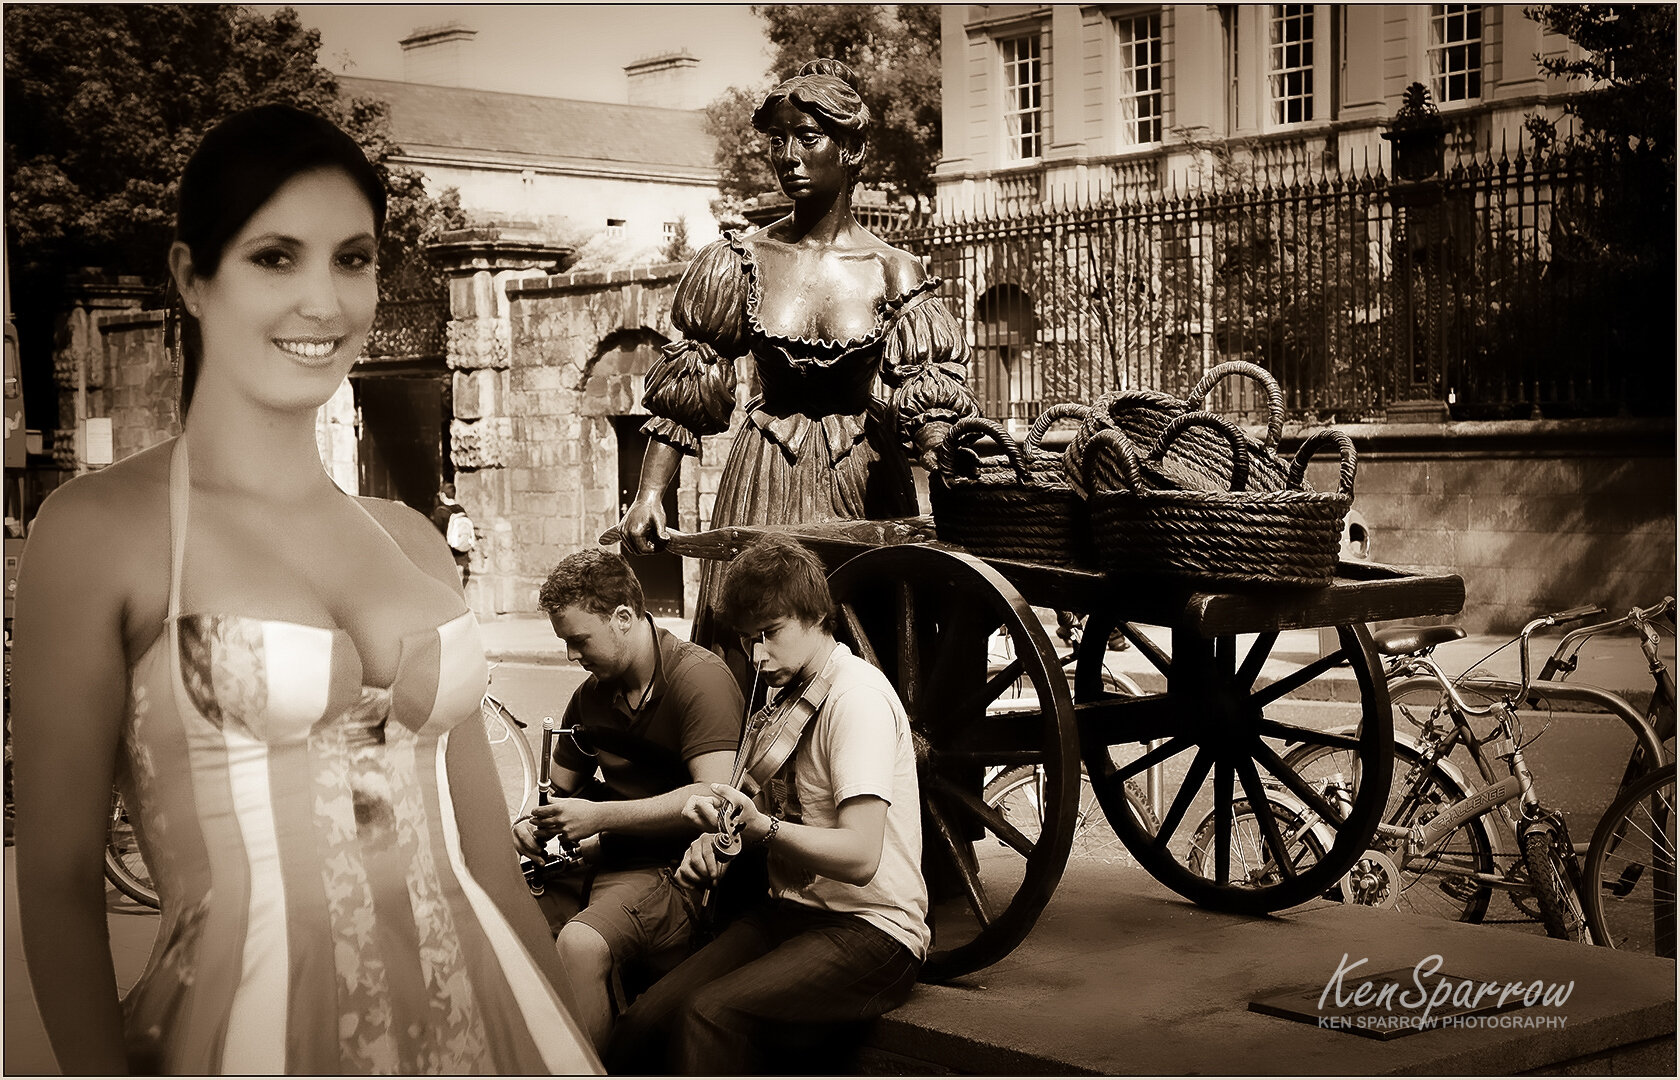 48 Angela with Molly Malone in Dublin ver 2 in sepia